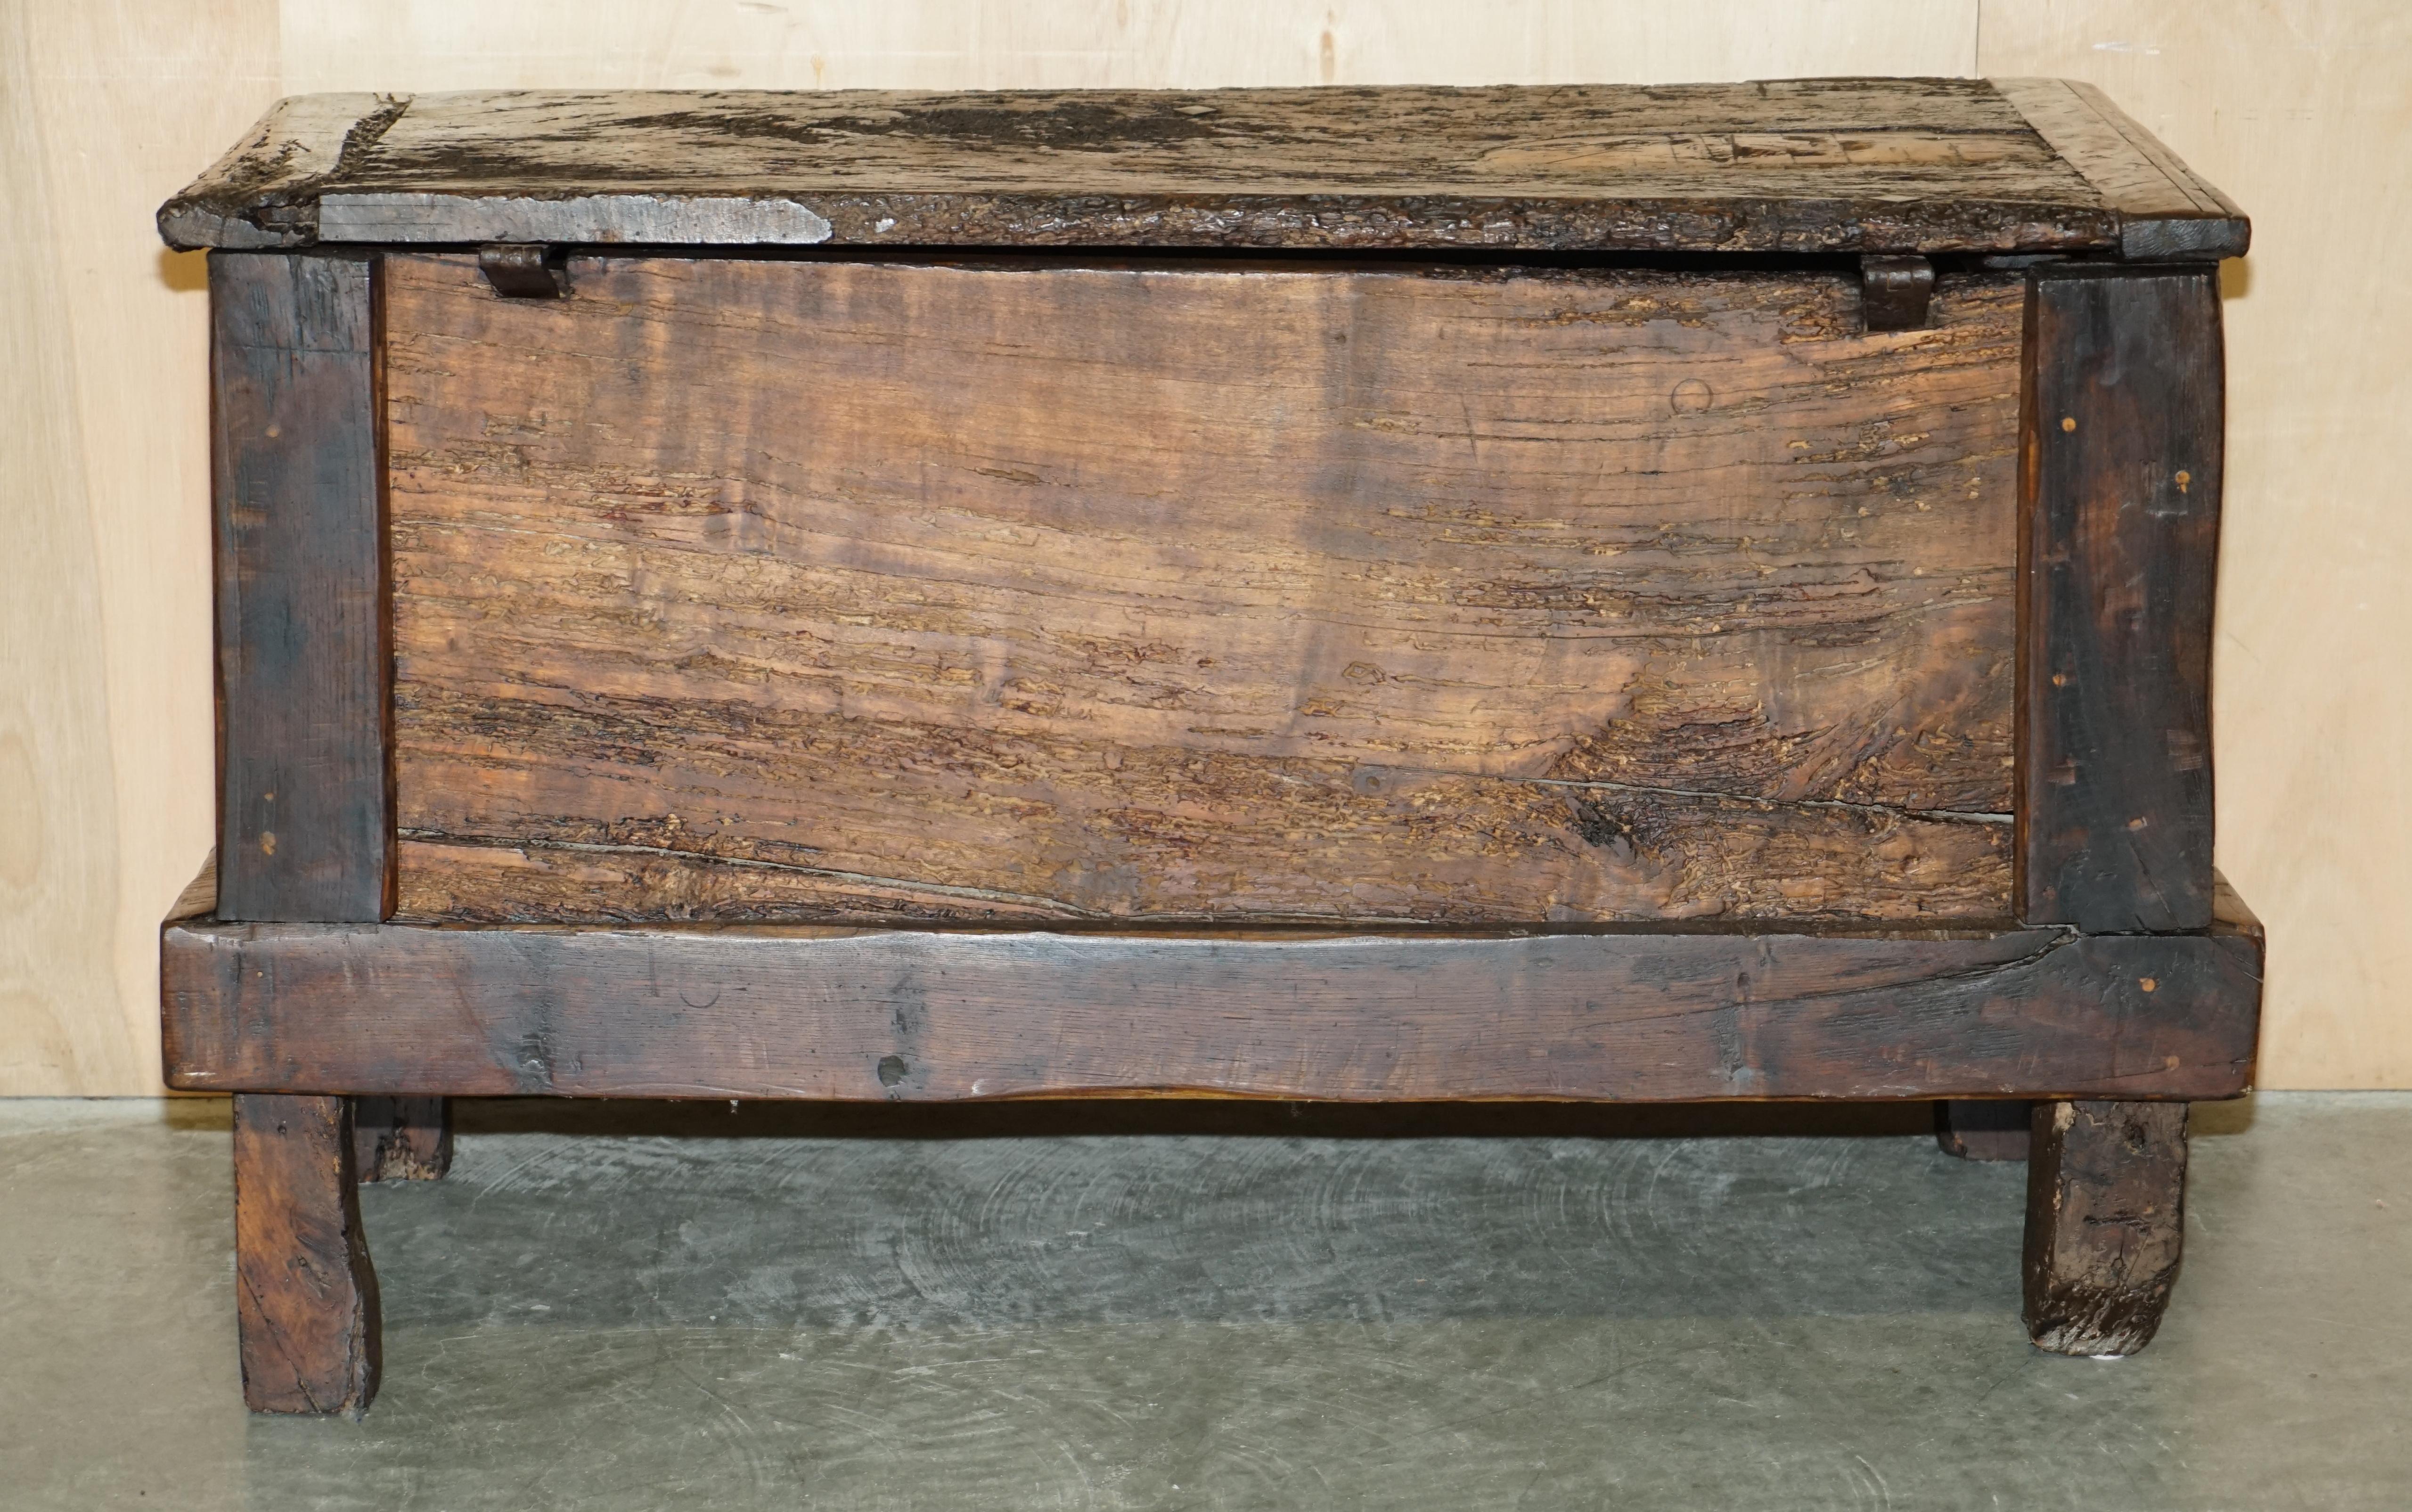 ANTiQUE 18TH CENTURY SIX PLANK HEAVILY BURRED CHESTNUT WOOD TRUNK CHEST im Angebot 10